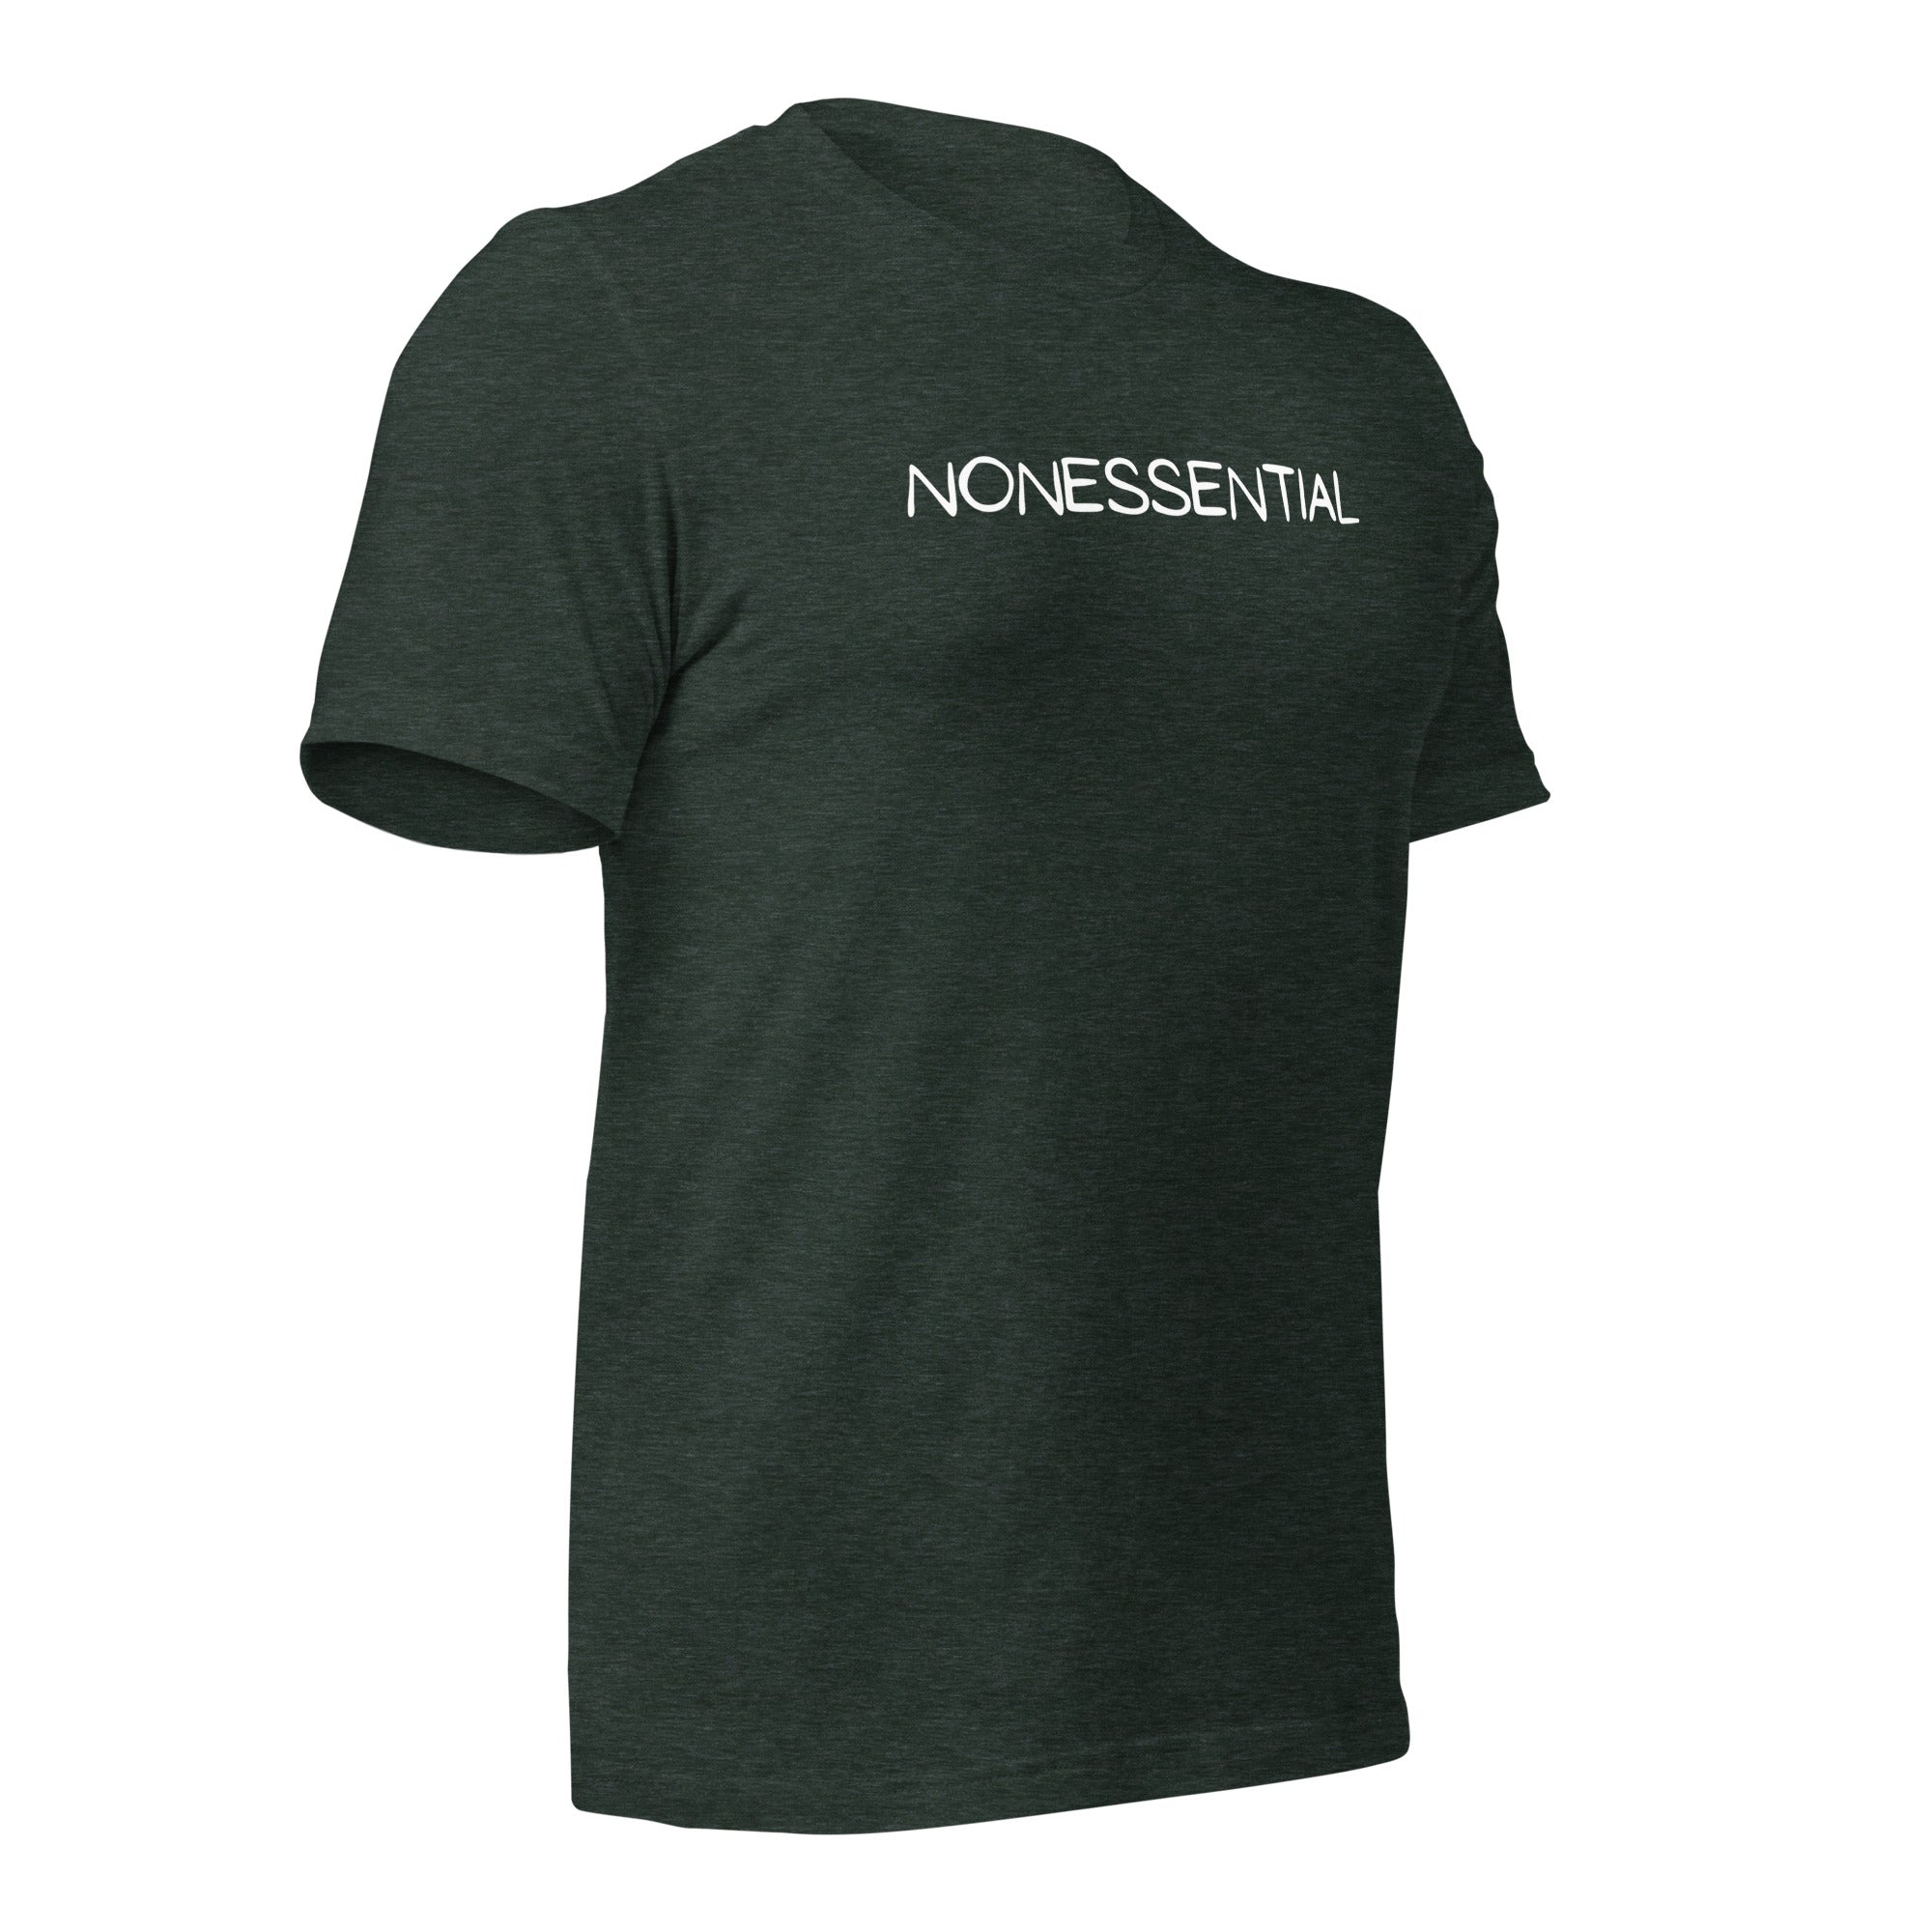 Nonessential Humorous T-Shirt